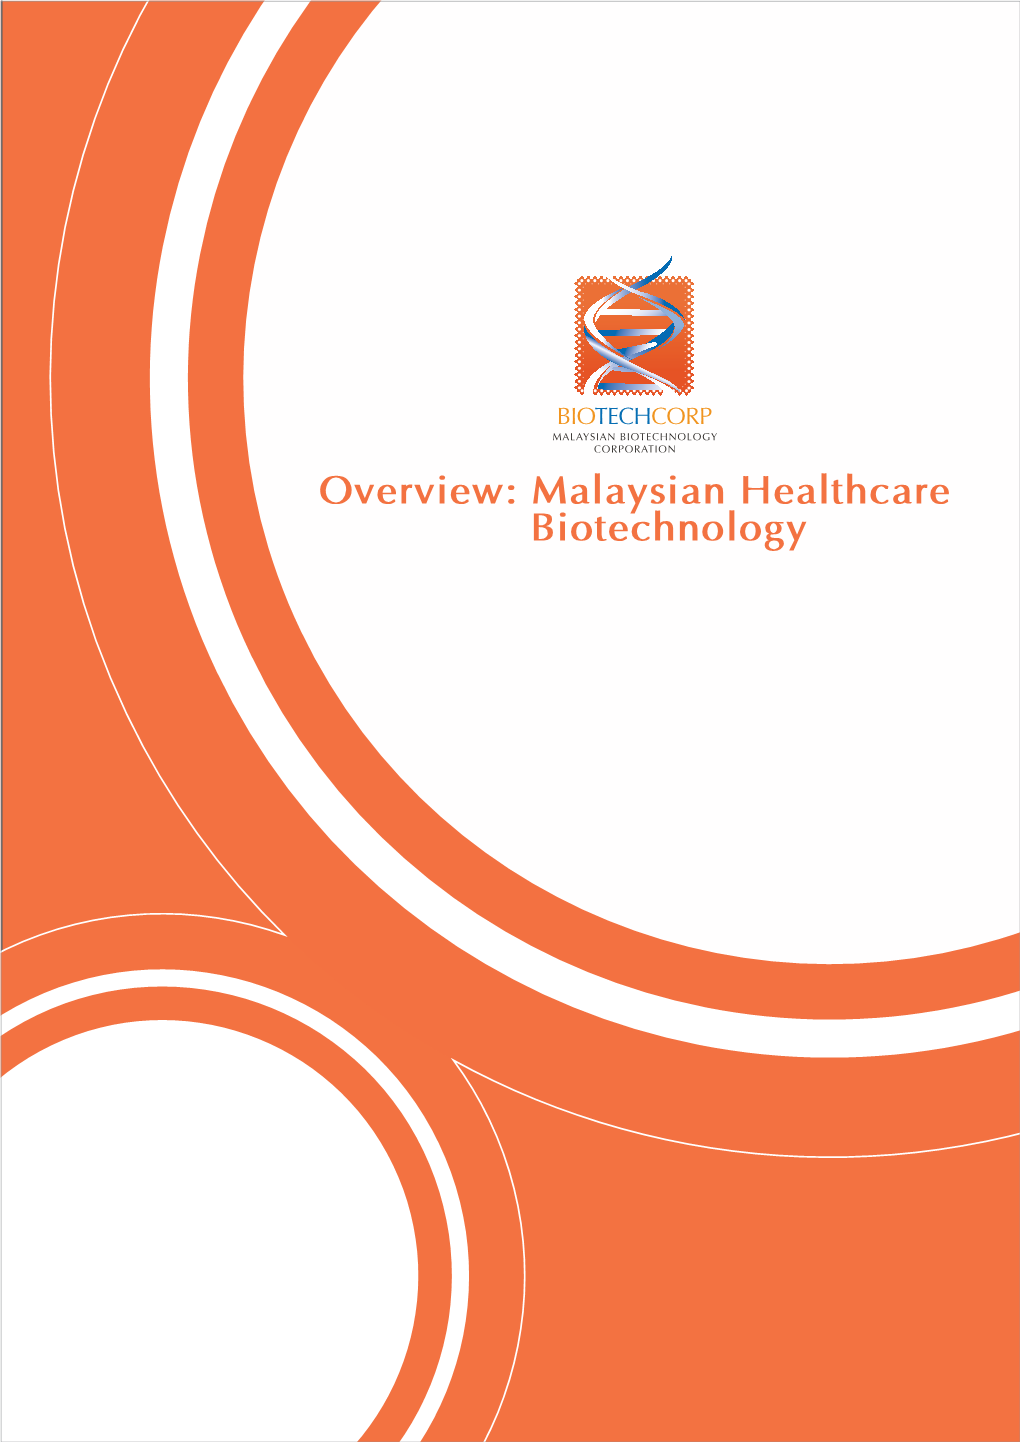 Overview: Malaysian Healthcare Biotechnology